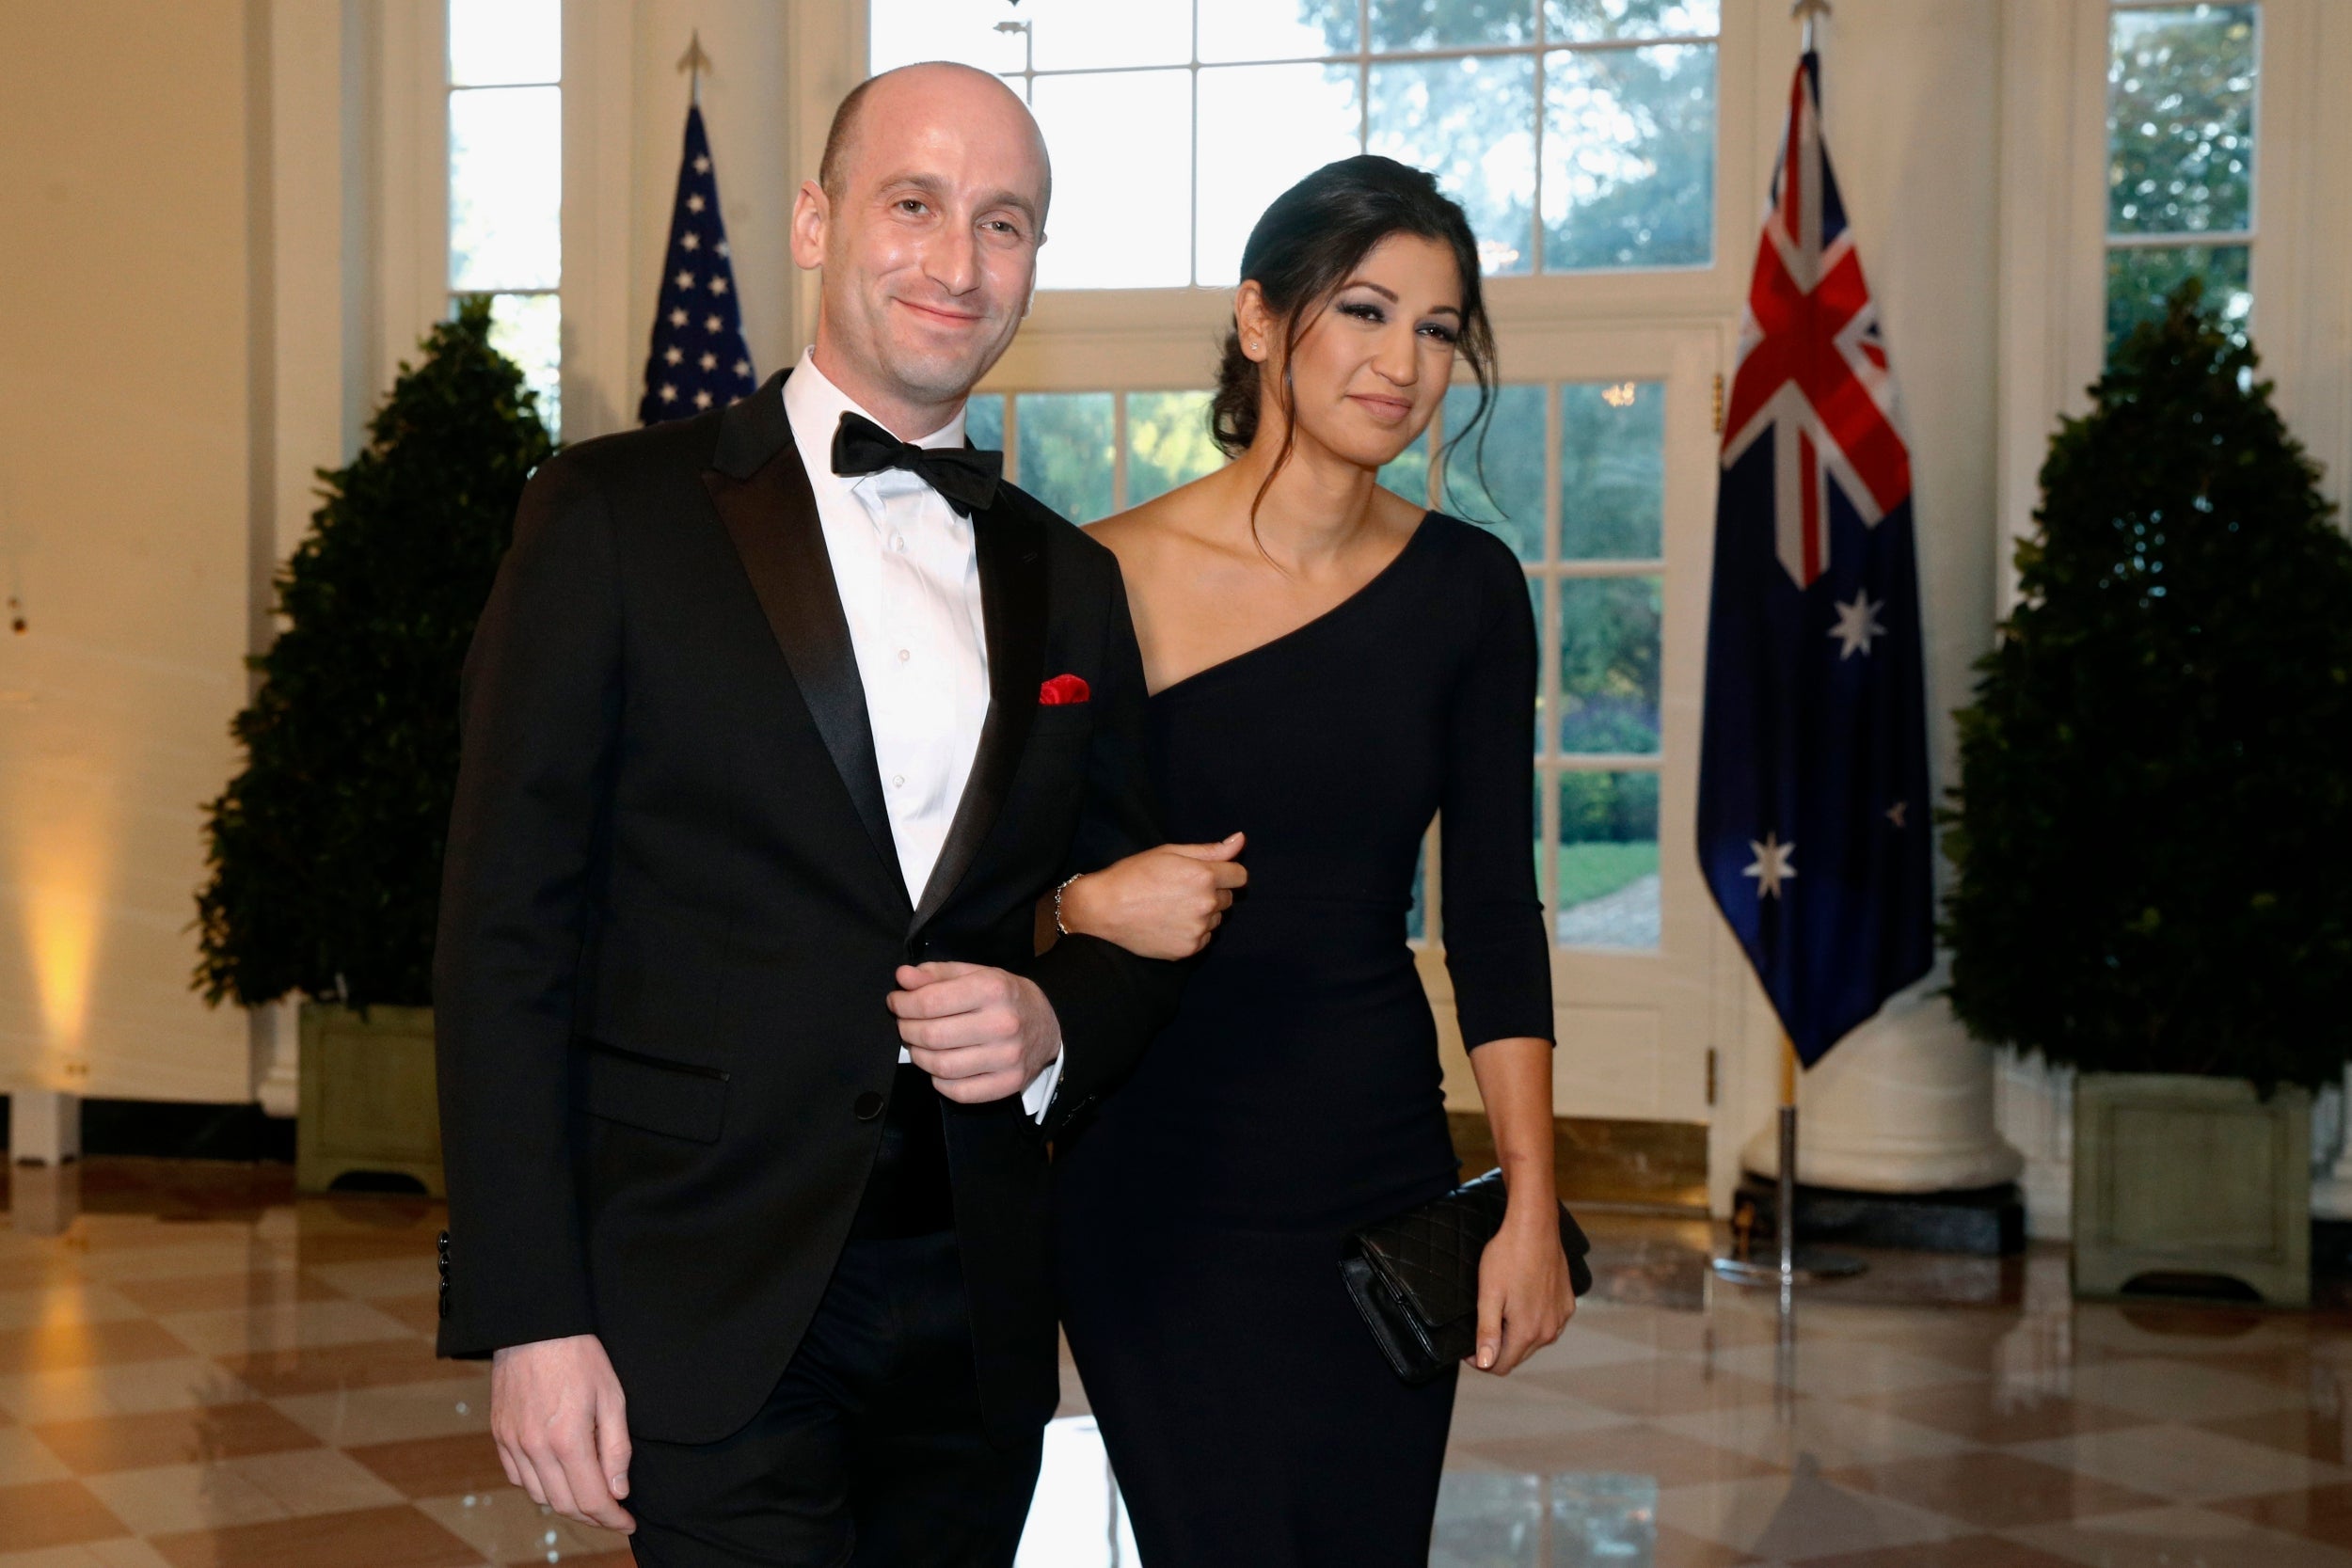 White House senior adviser Stephen Miller got married on Sunday evening. The New York Times published a wedding announcement